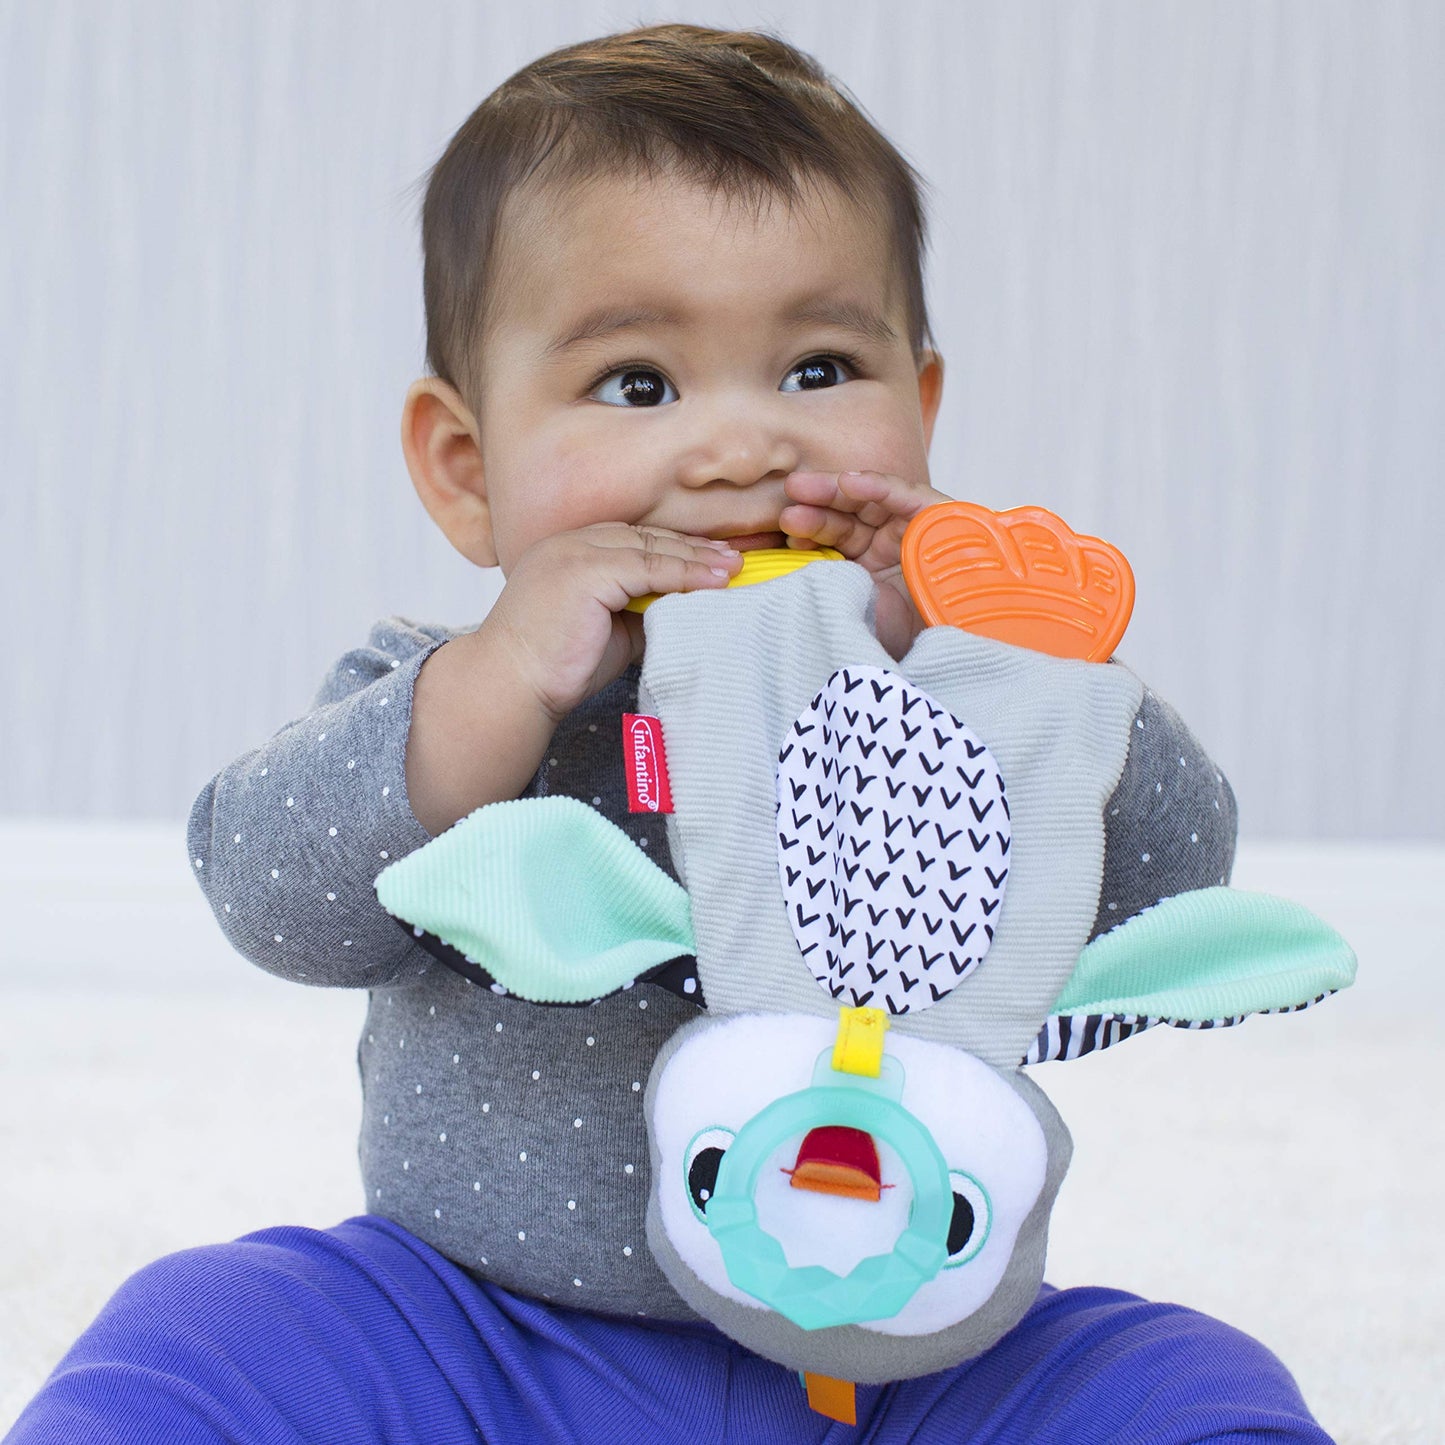 Infantino Cuddly Teether Penguin For Sensory Exploration - Silicone Teether, Teething Relief